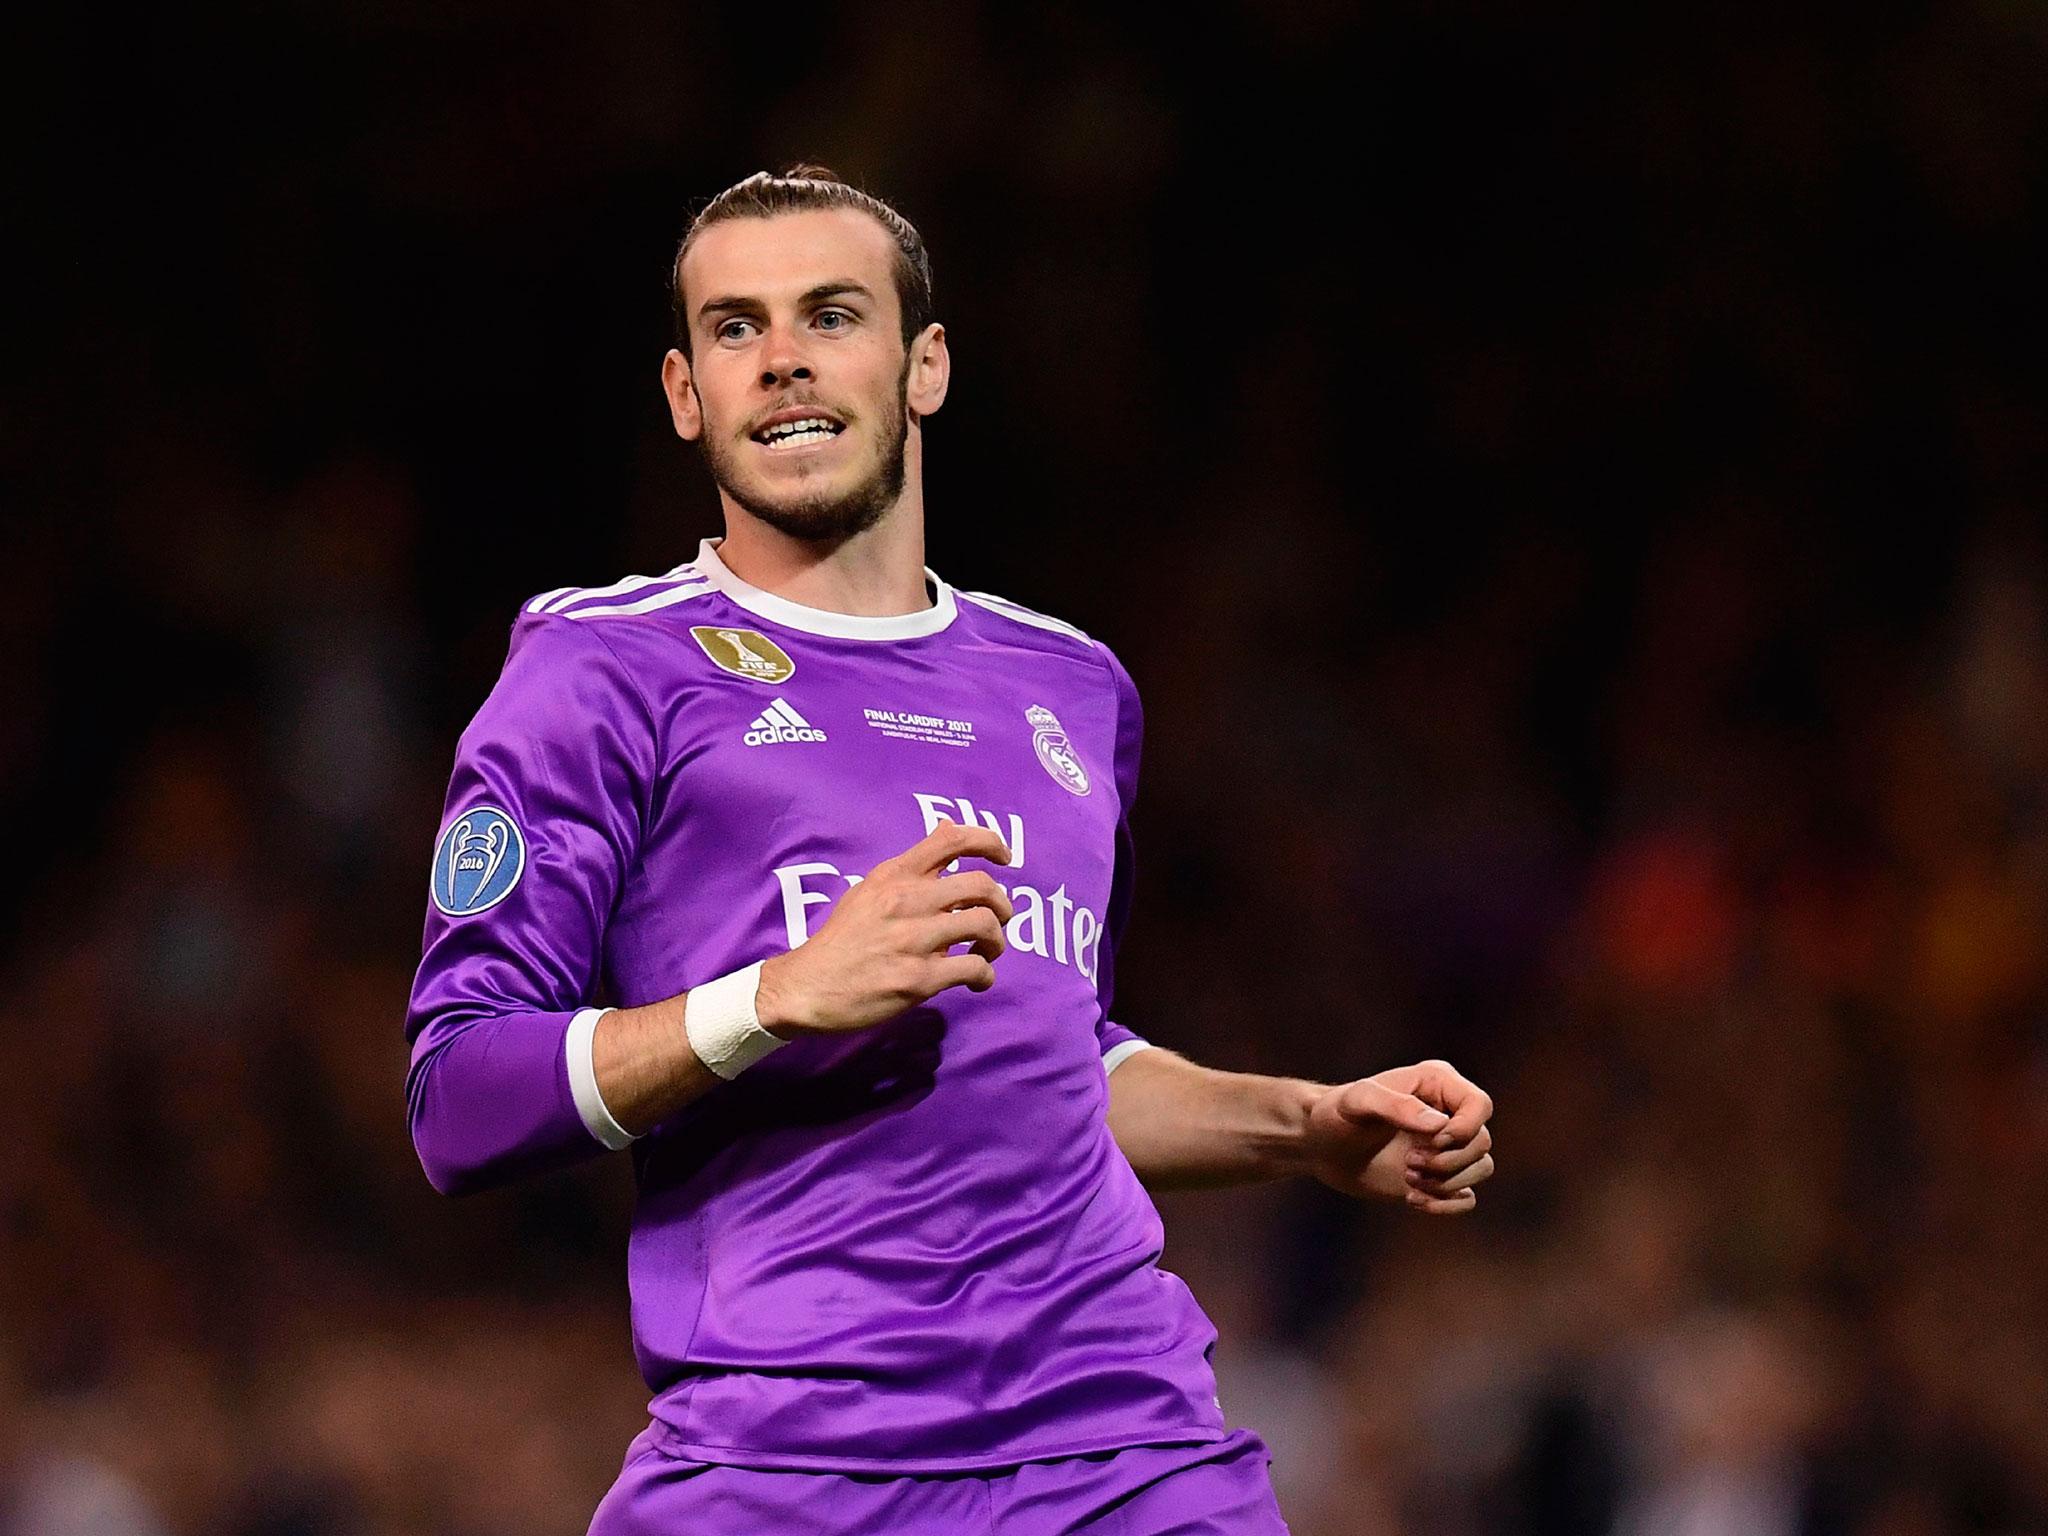 Gareth Bale was linked with a return to the Premier League ahead of the Champions League final